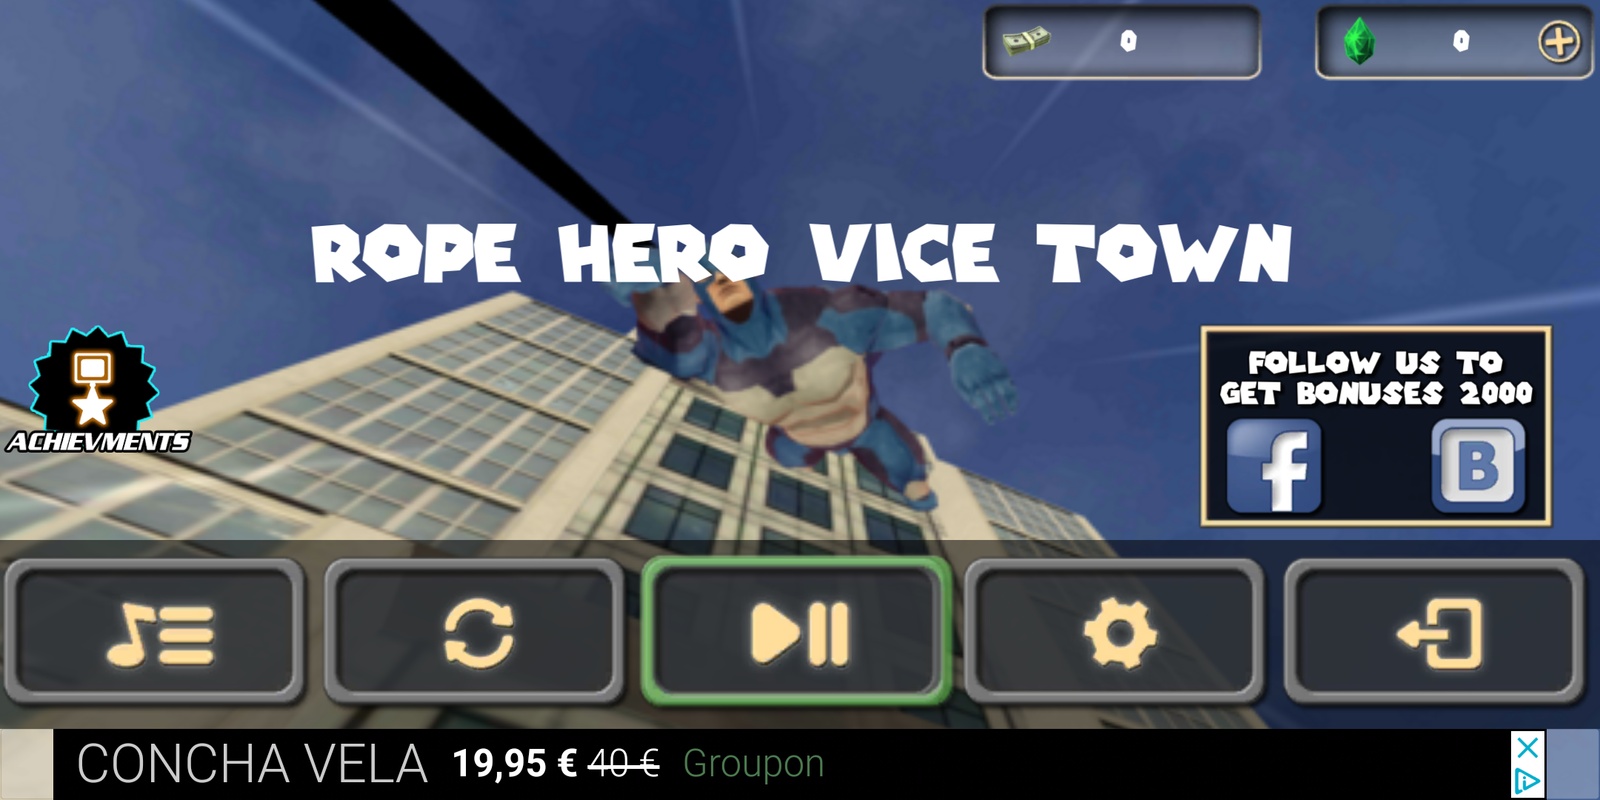 Rope Hero Vice Town 6.5.1 APK feature